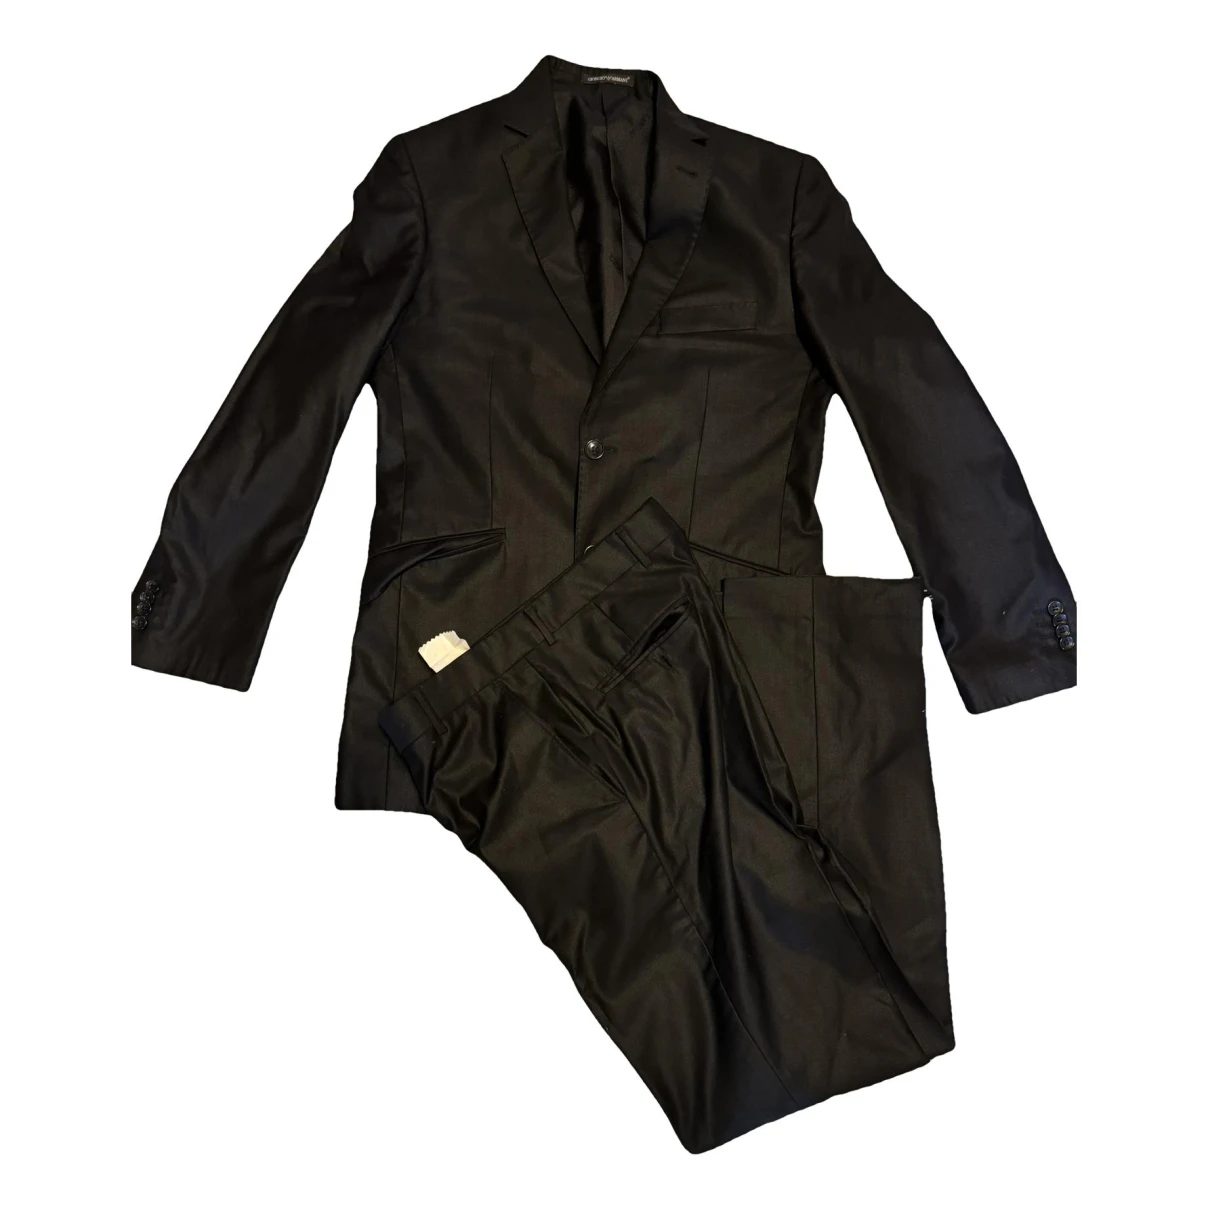 Pre-owned Giorgio Armani Wool Suit In Black